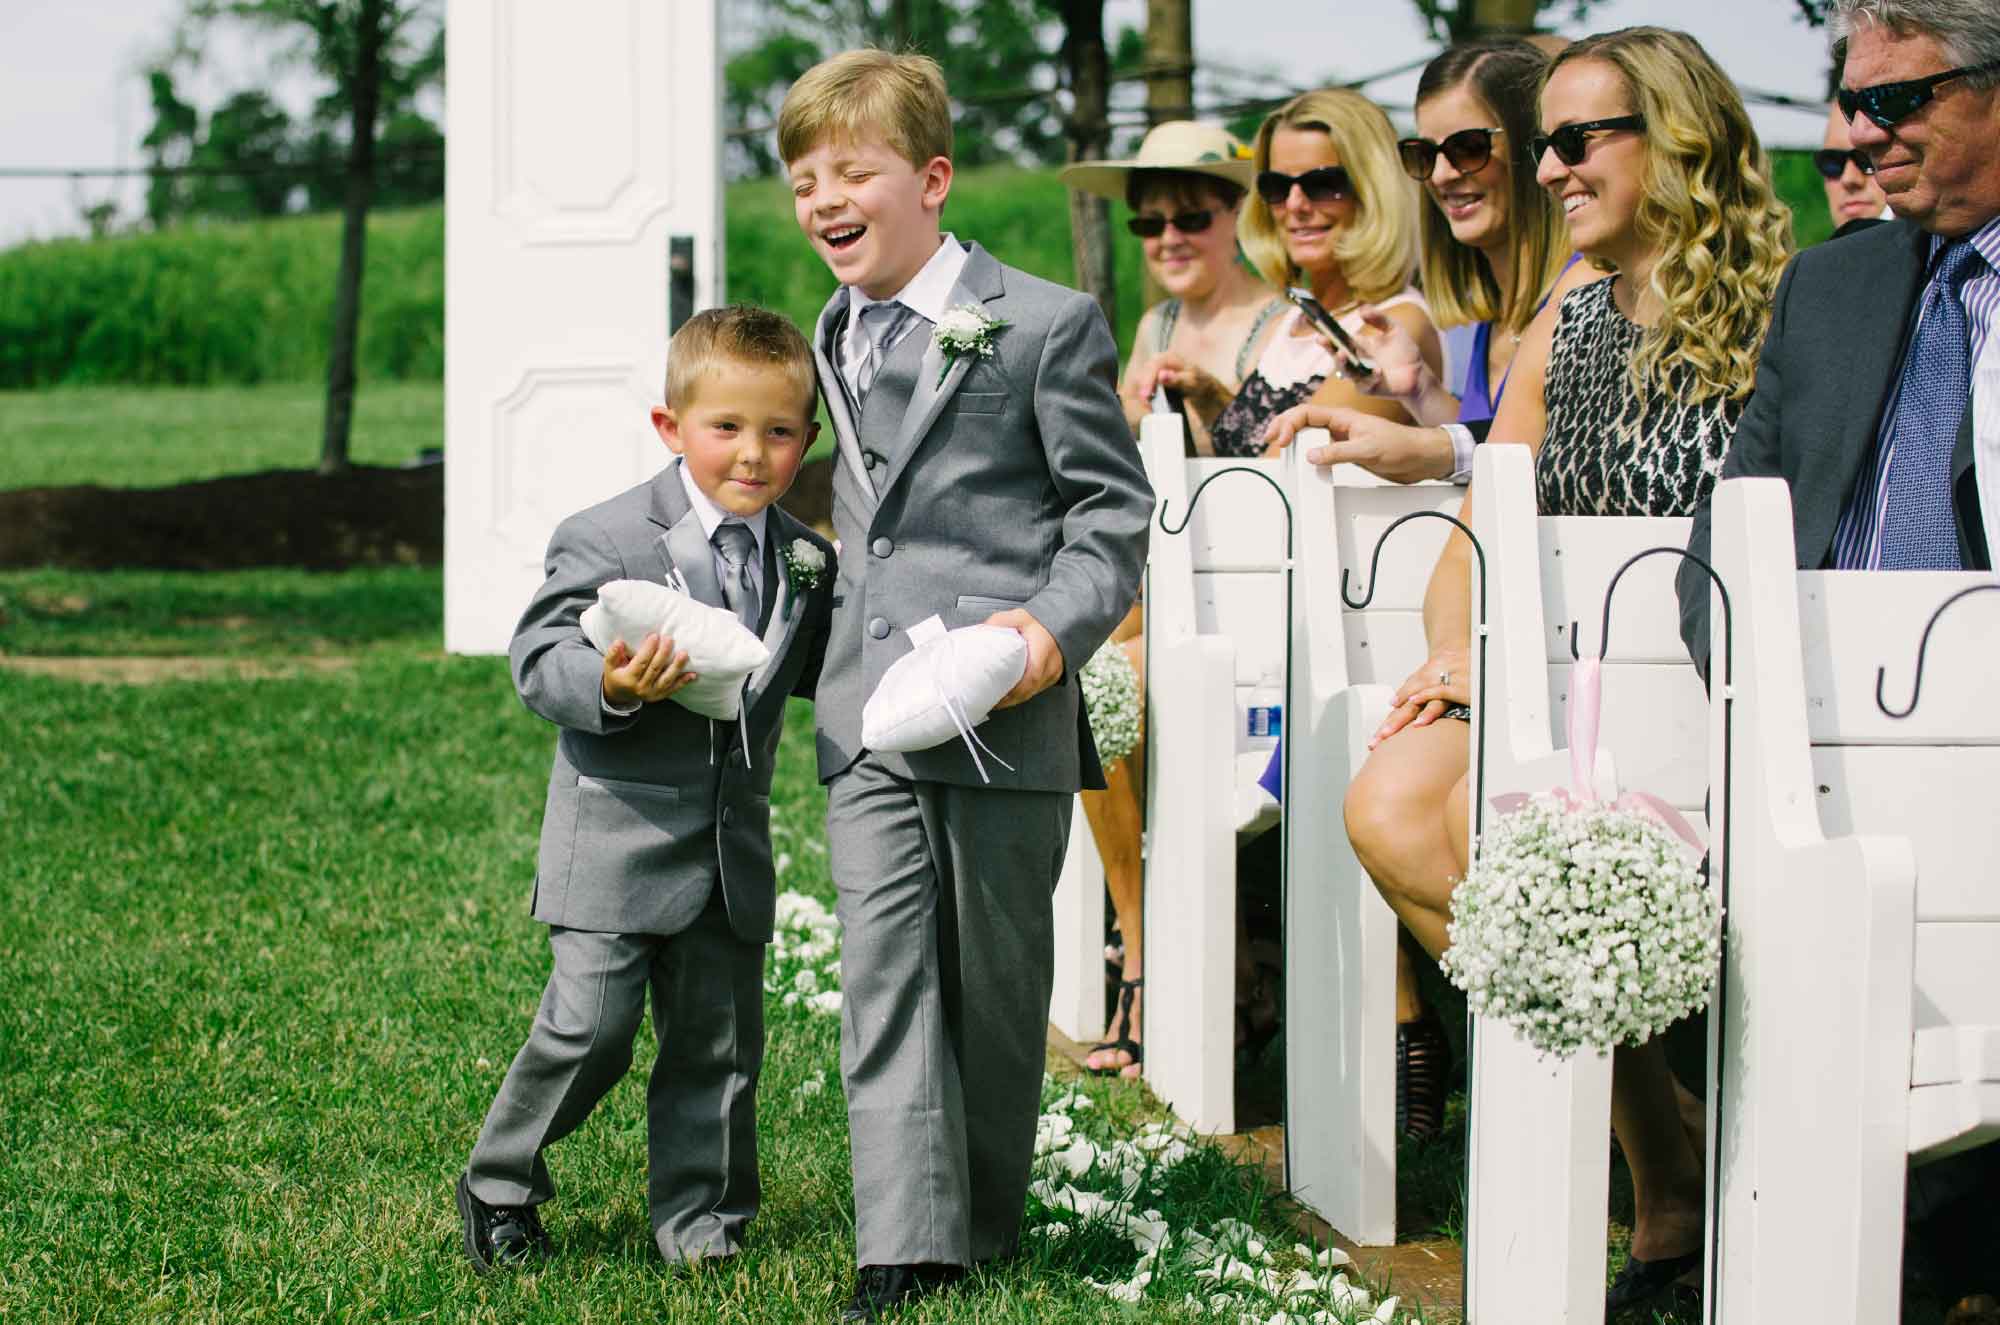 Ring bearers walking down aisle at wedding ceremony